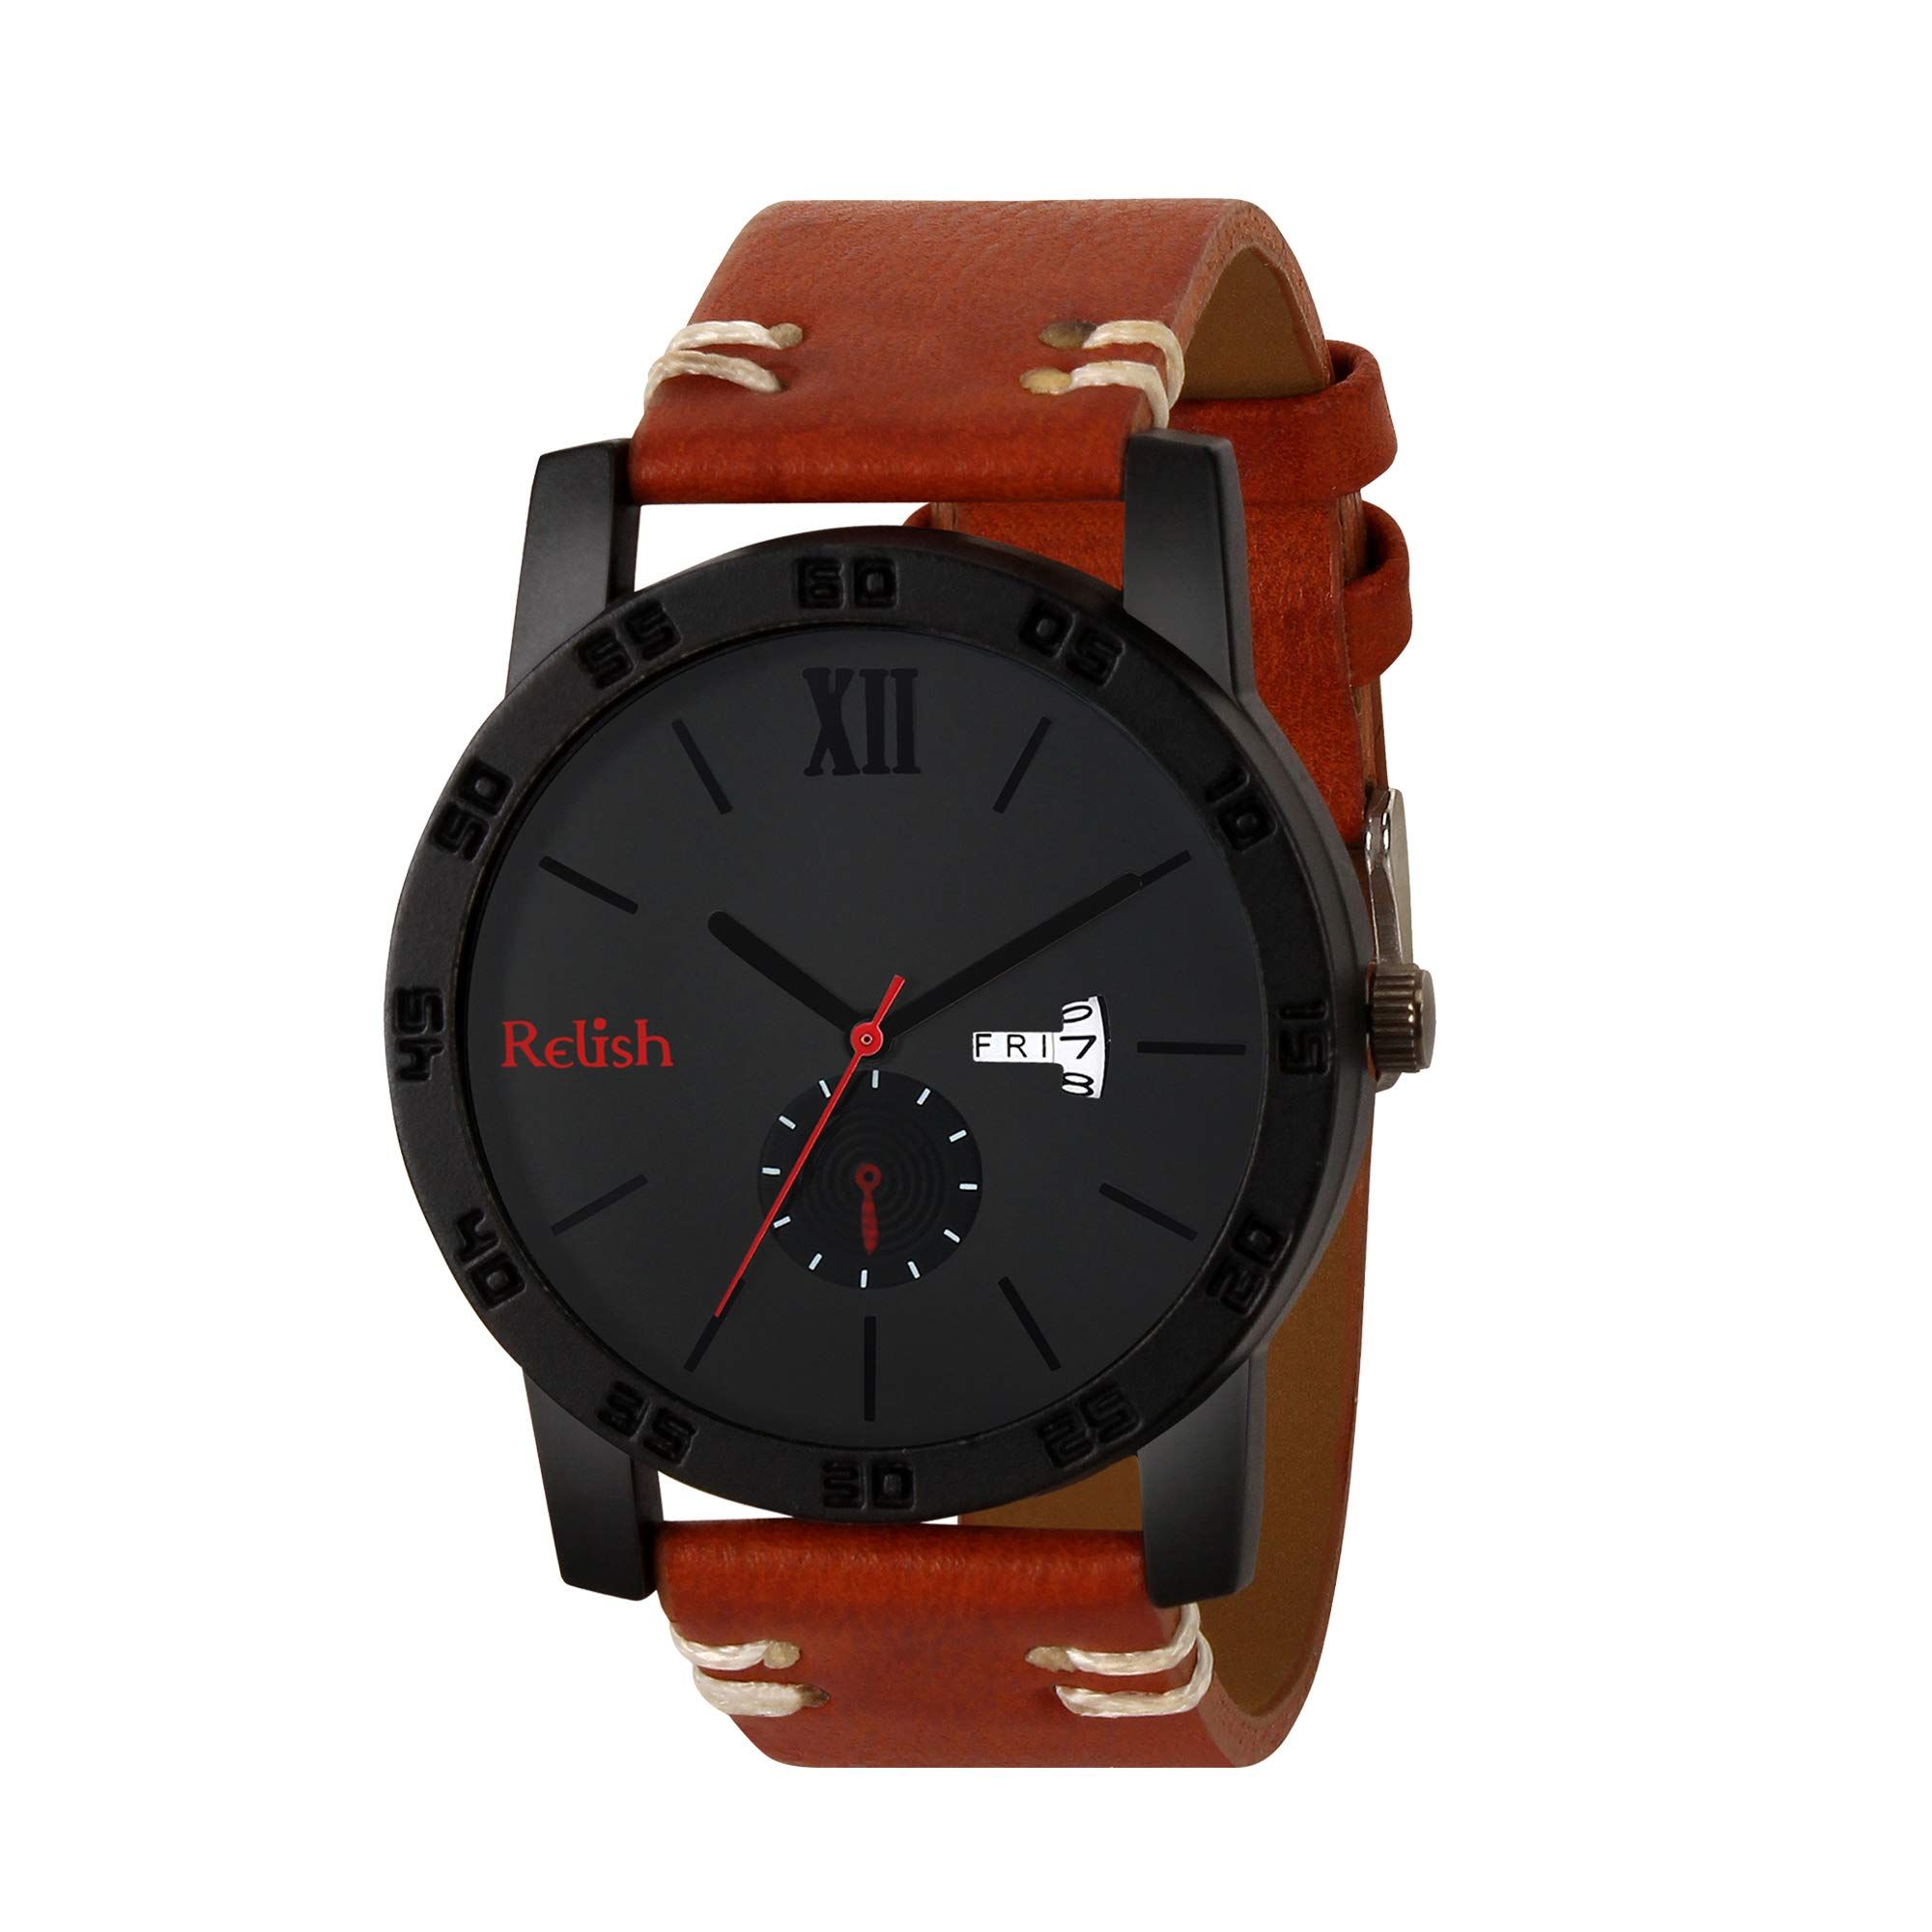 Relish Analog Watch Day & Date Men's Watch & Black Leather Wallet Combo for  Men and Boys